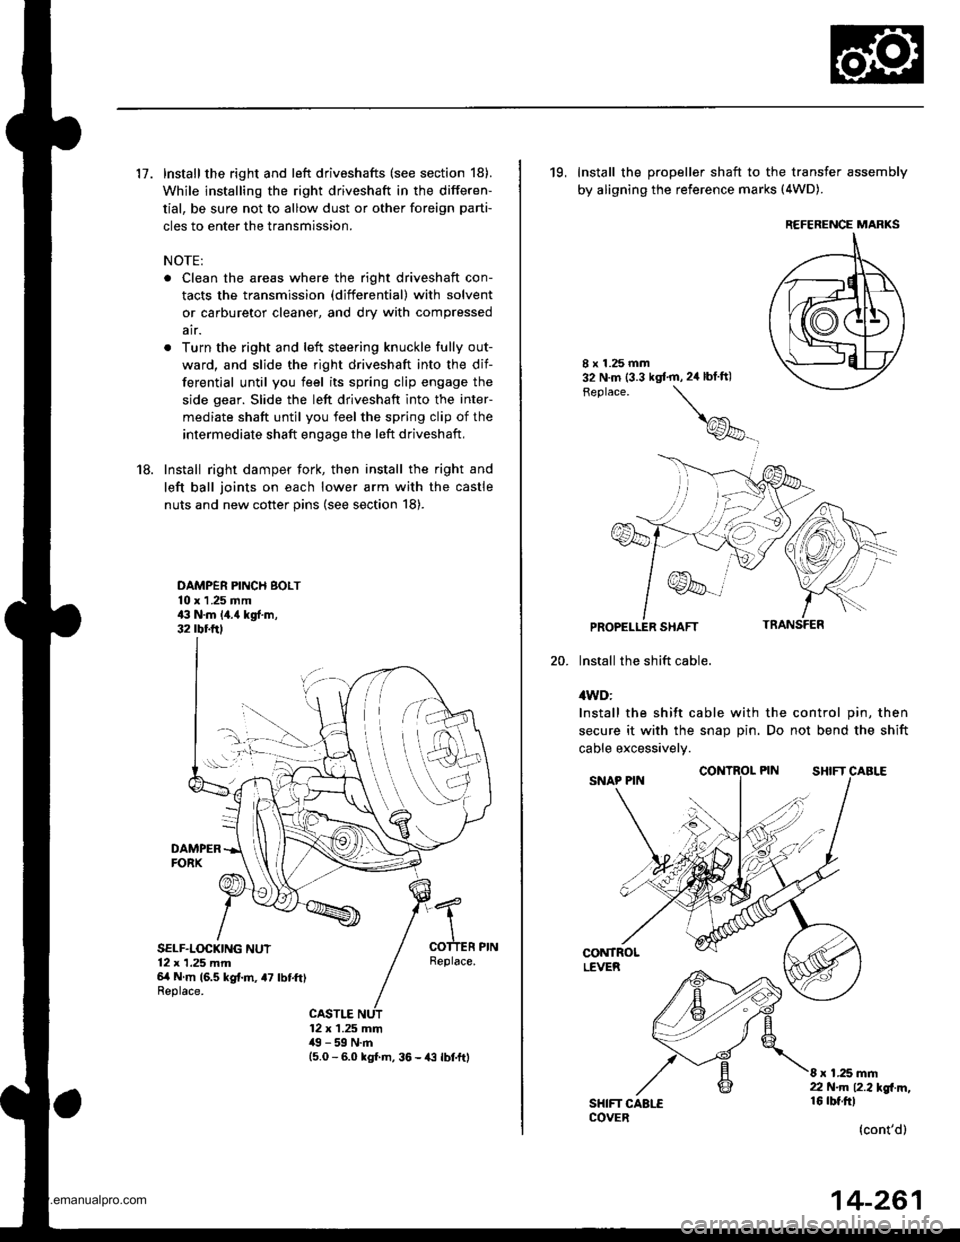 HONDA CR-V 1999 RD1-RD3 / 1.G Workshop Manual 
17. Install the right and left driveshafts (see section 18).
While installing the right driveshaft in the differen-
tial, be sure not to allow dust or other foreign parti-
cles to enter the transmiss